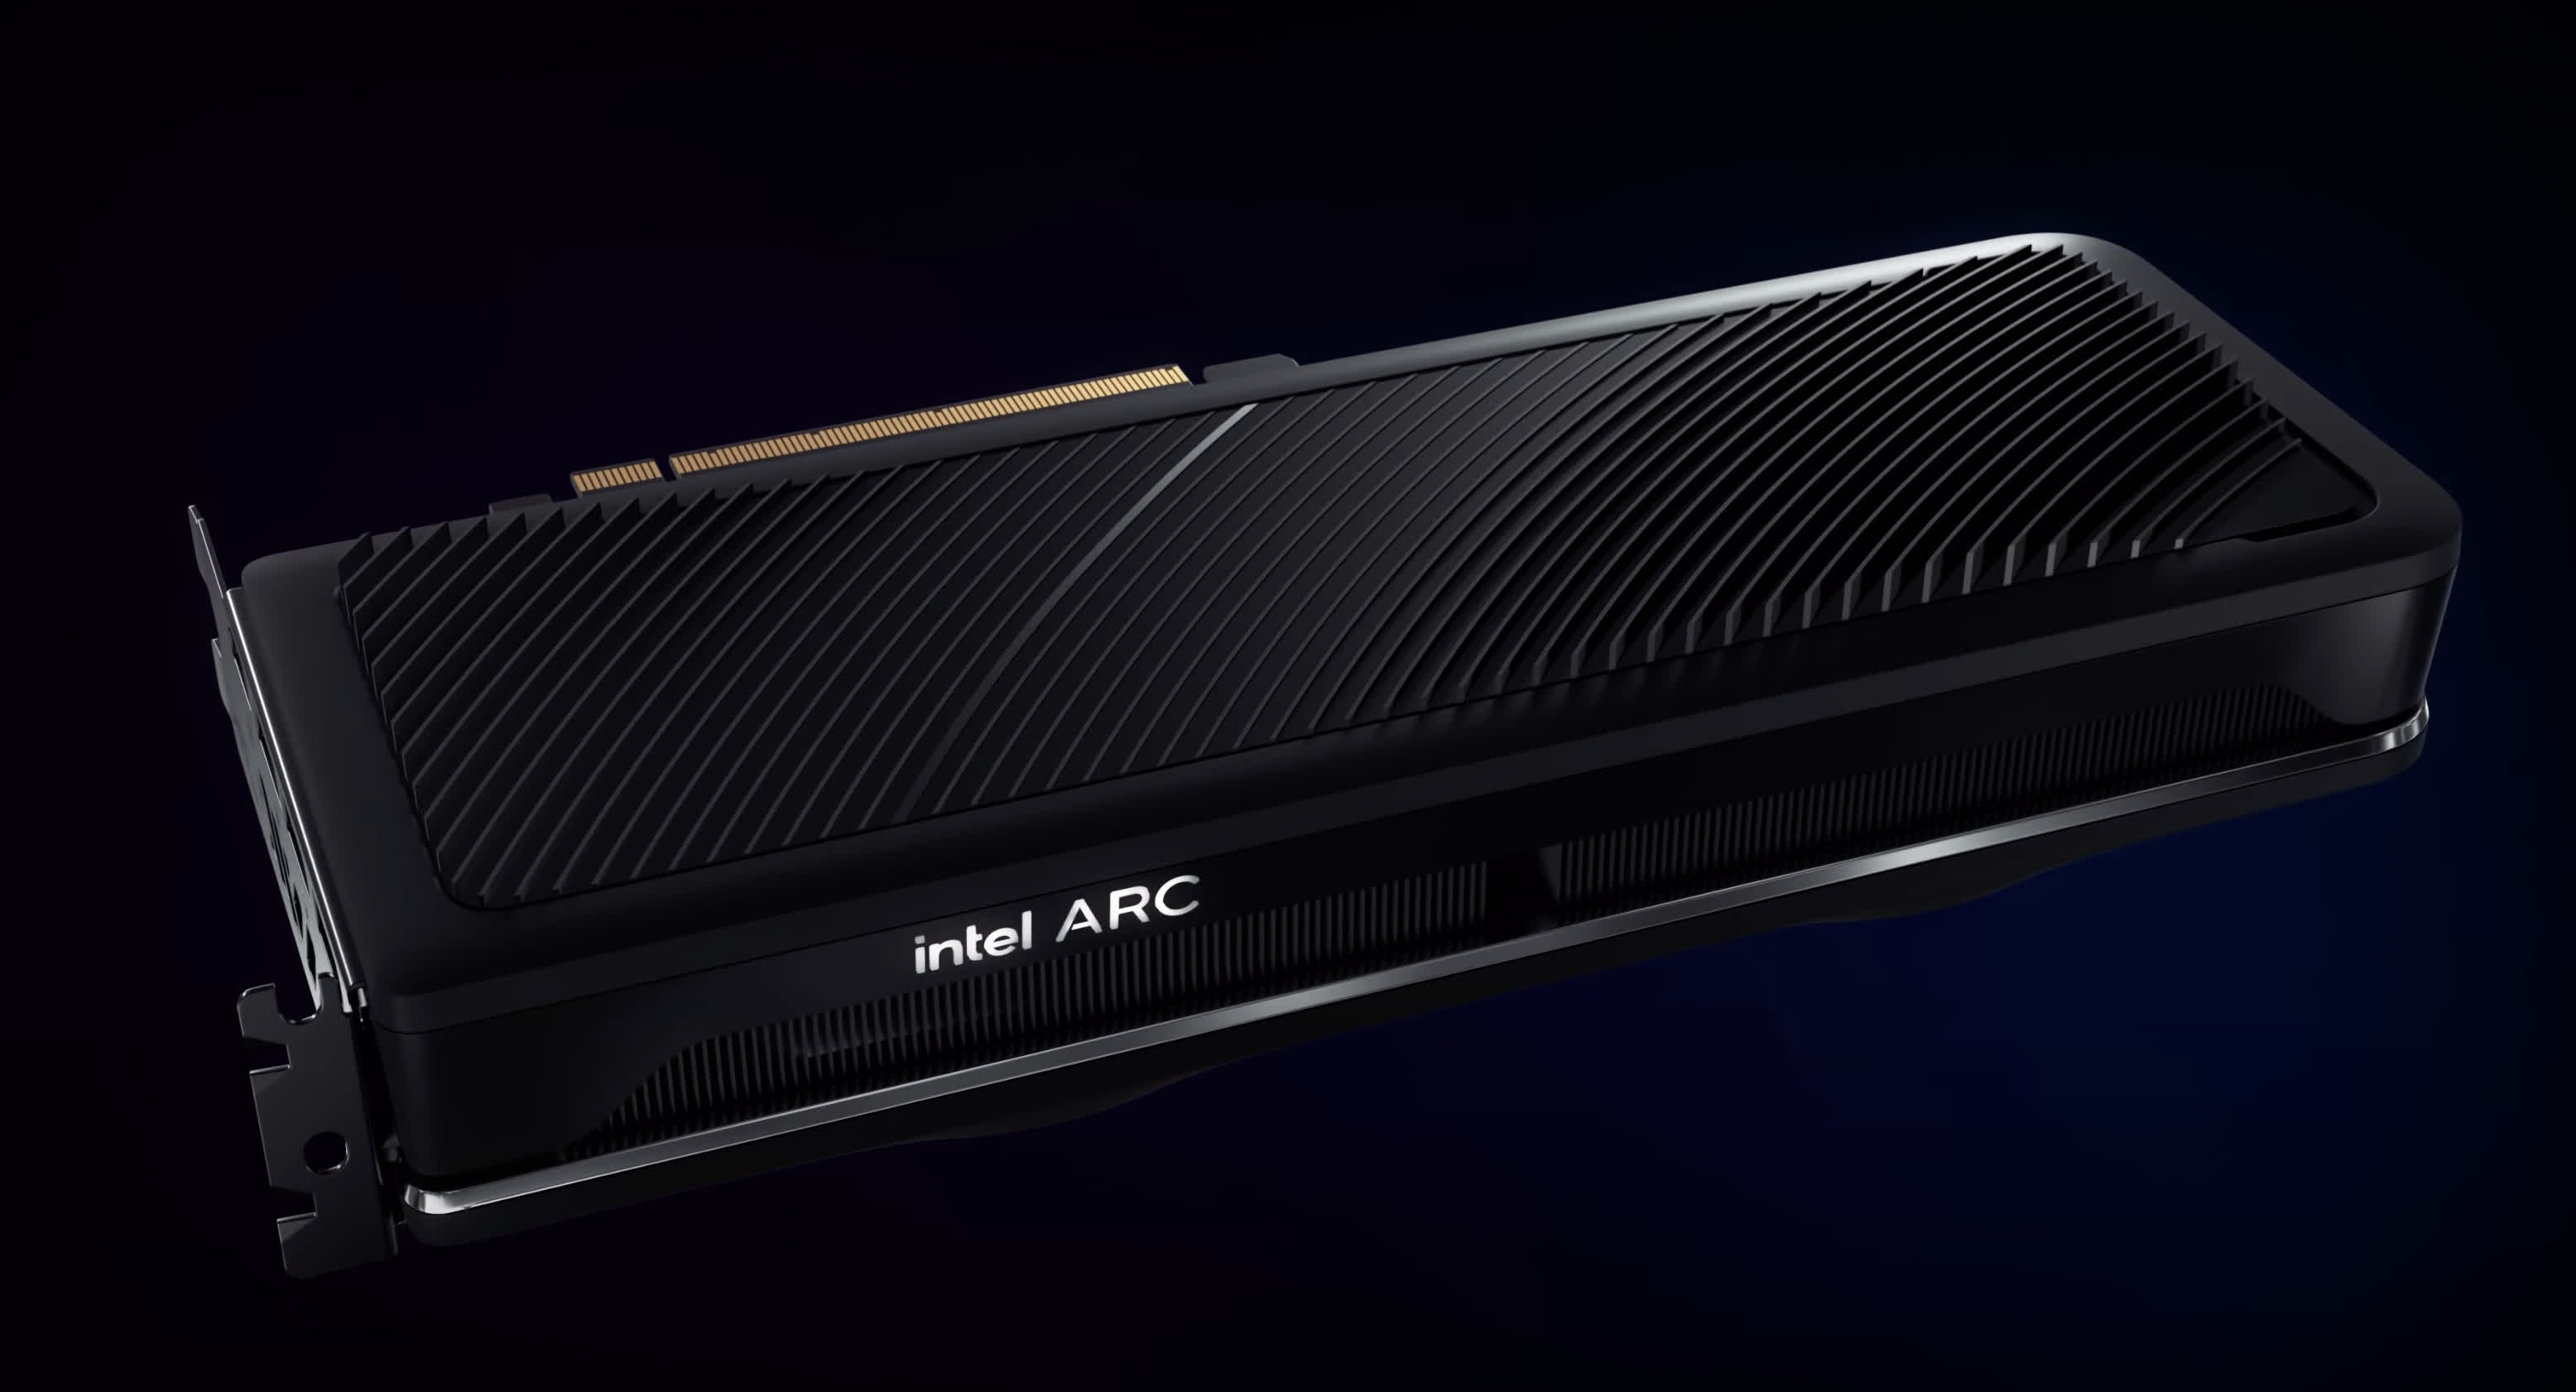 Intel could launch Arc Alchemist desktop cards around Computex, with competitive prices